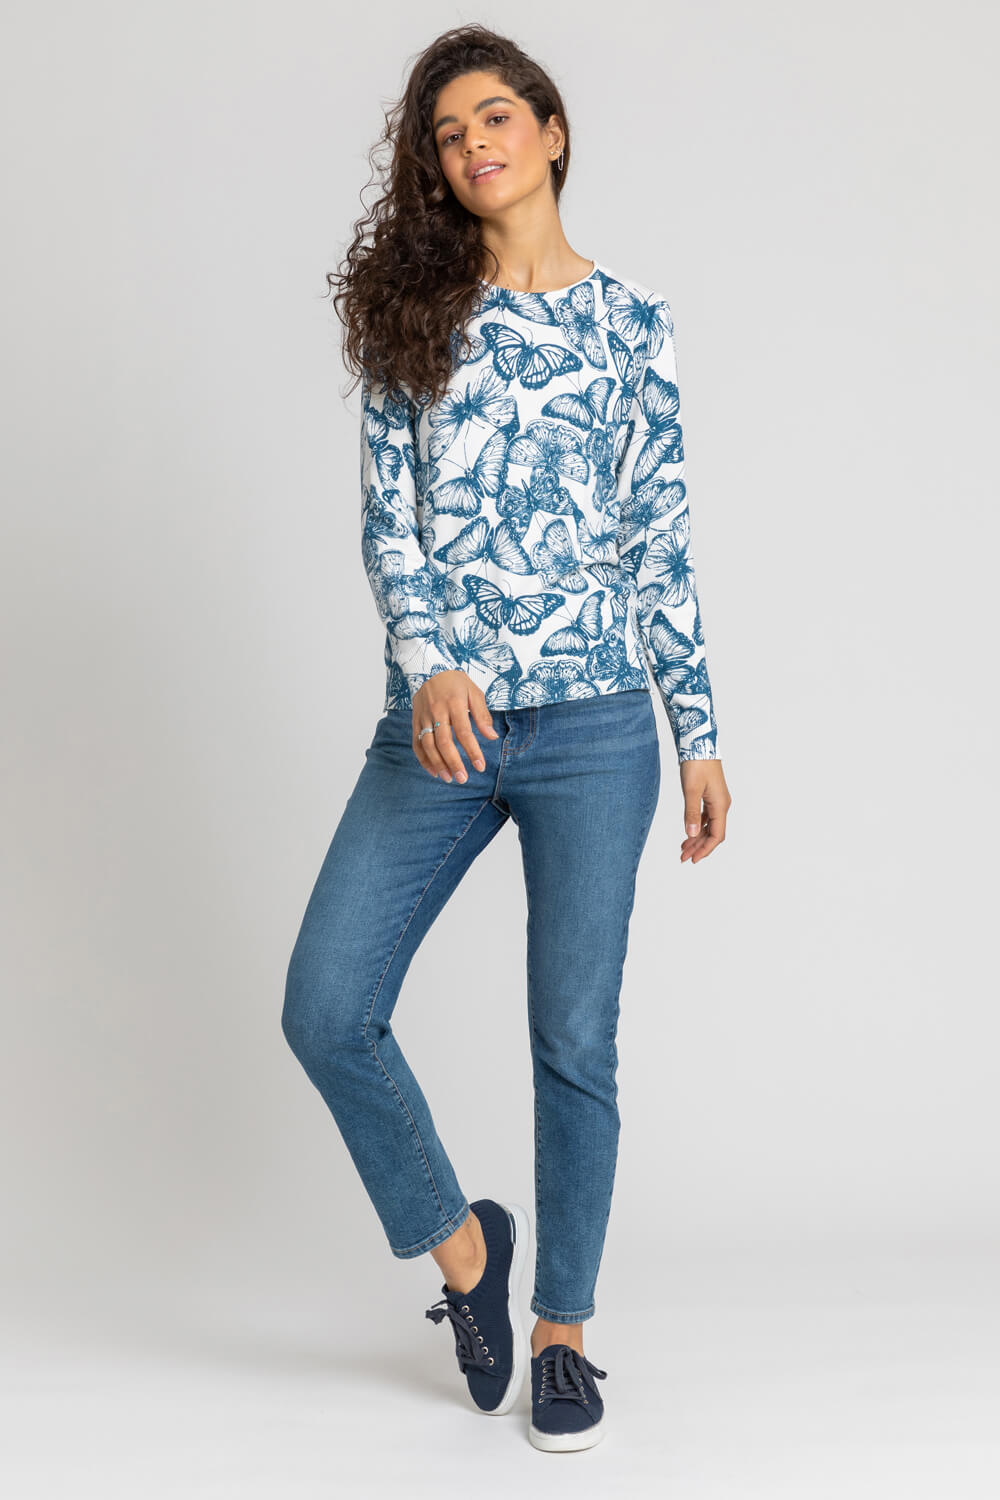 Blue Butterfly Print Crew Neck Jumper, Image 3 of 4